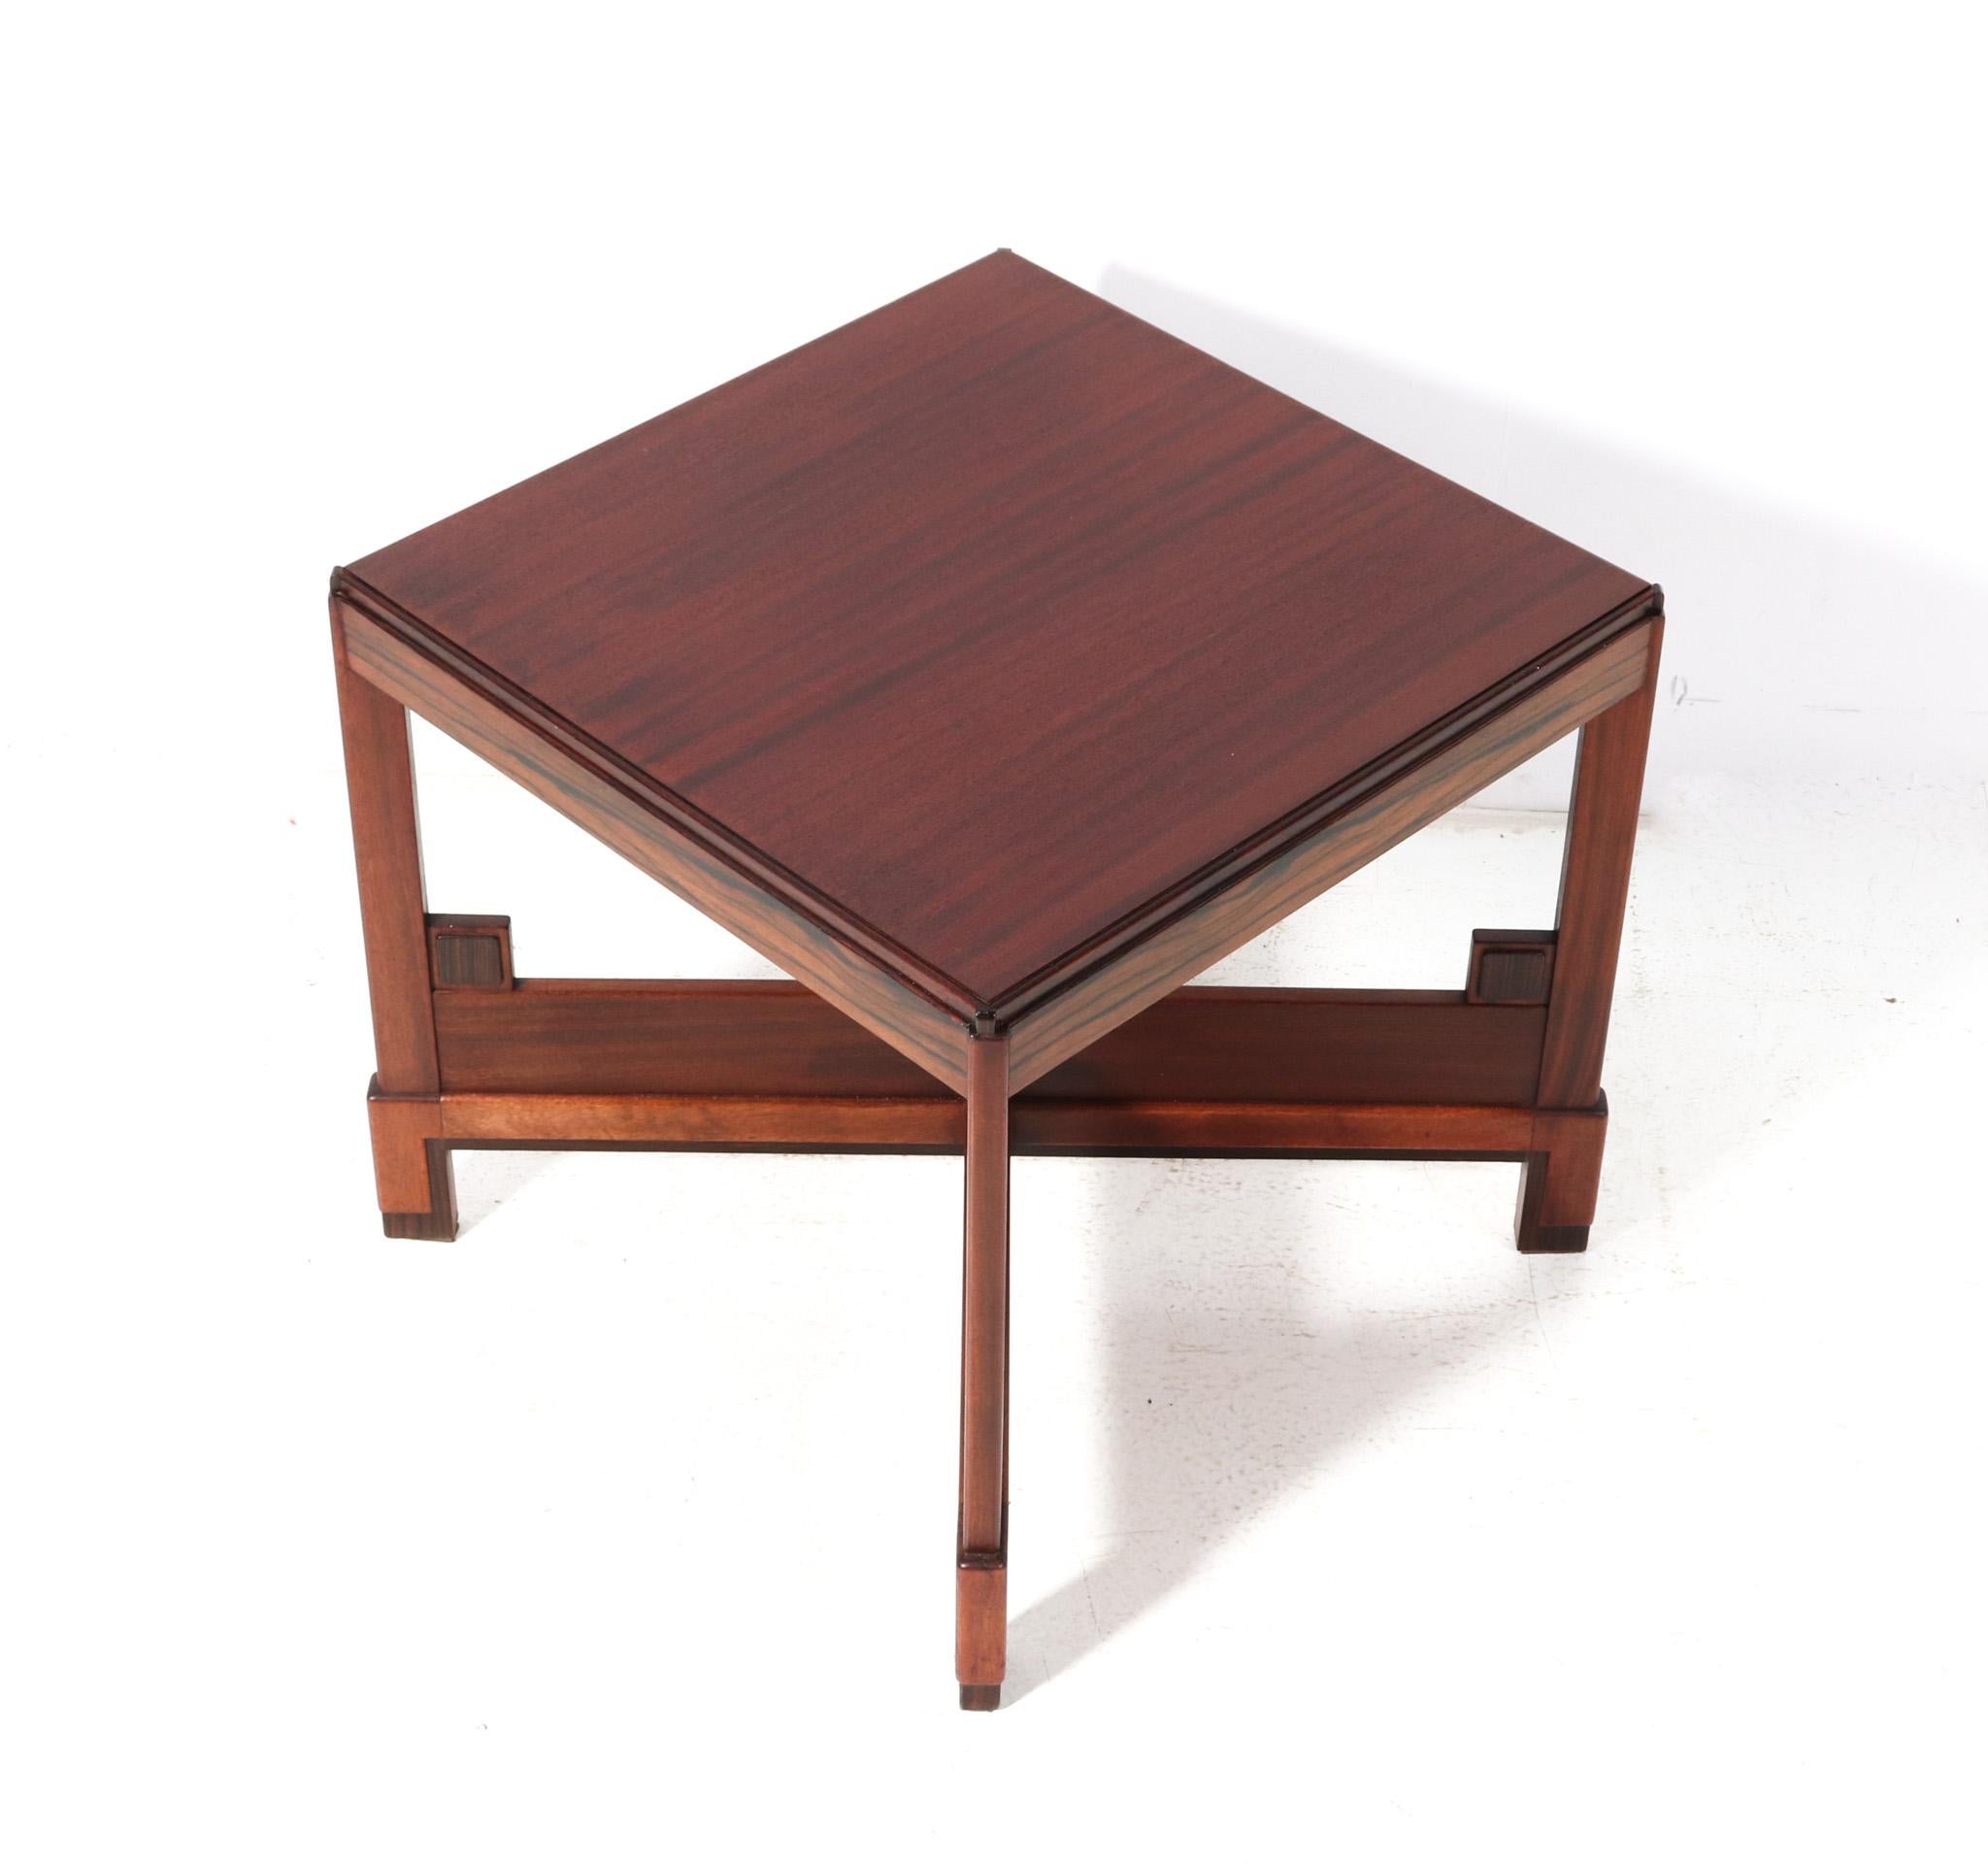 Stunning and rare Art Deco Modernist coffee table or cocktail table.
Striking Dutch design from the 1920s.
Solid walnut base with original macassar ebony elements.
The top is original veneered with walnut.
In very good original condition with minor